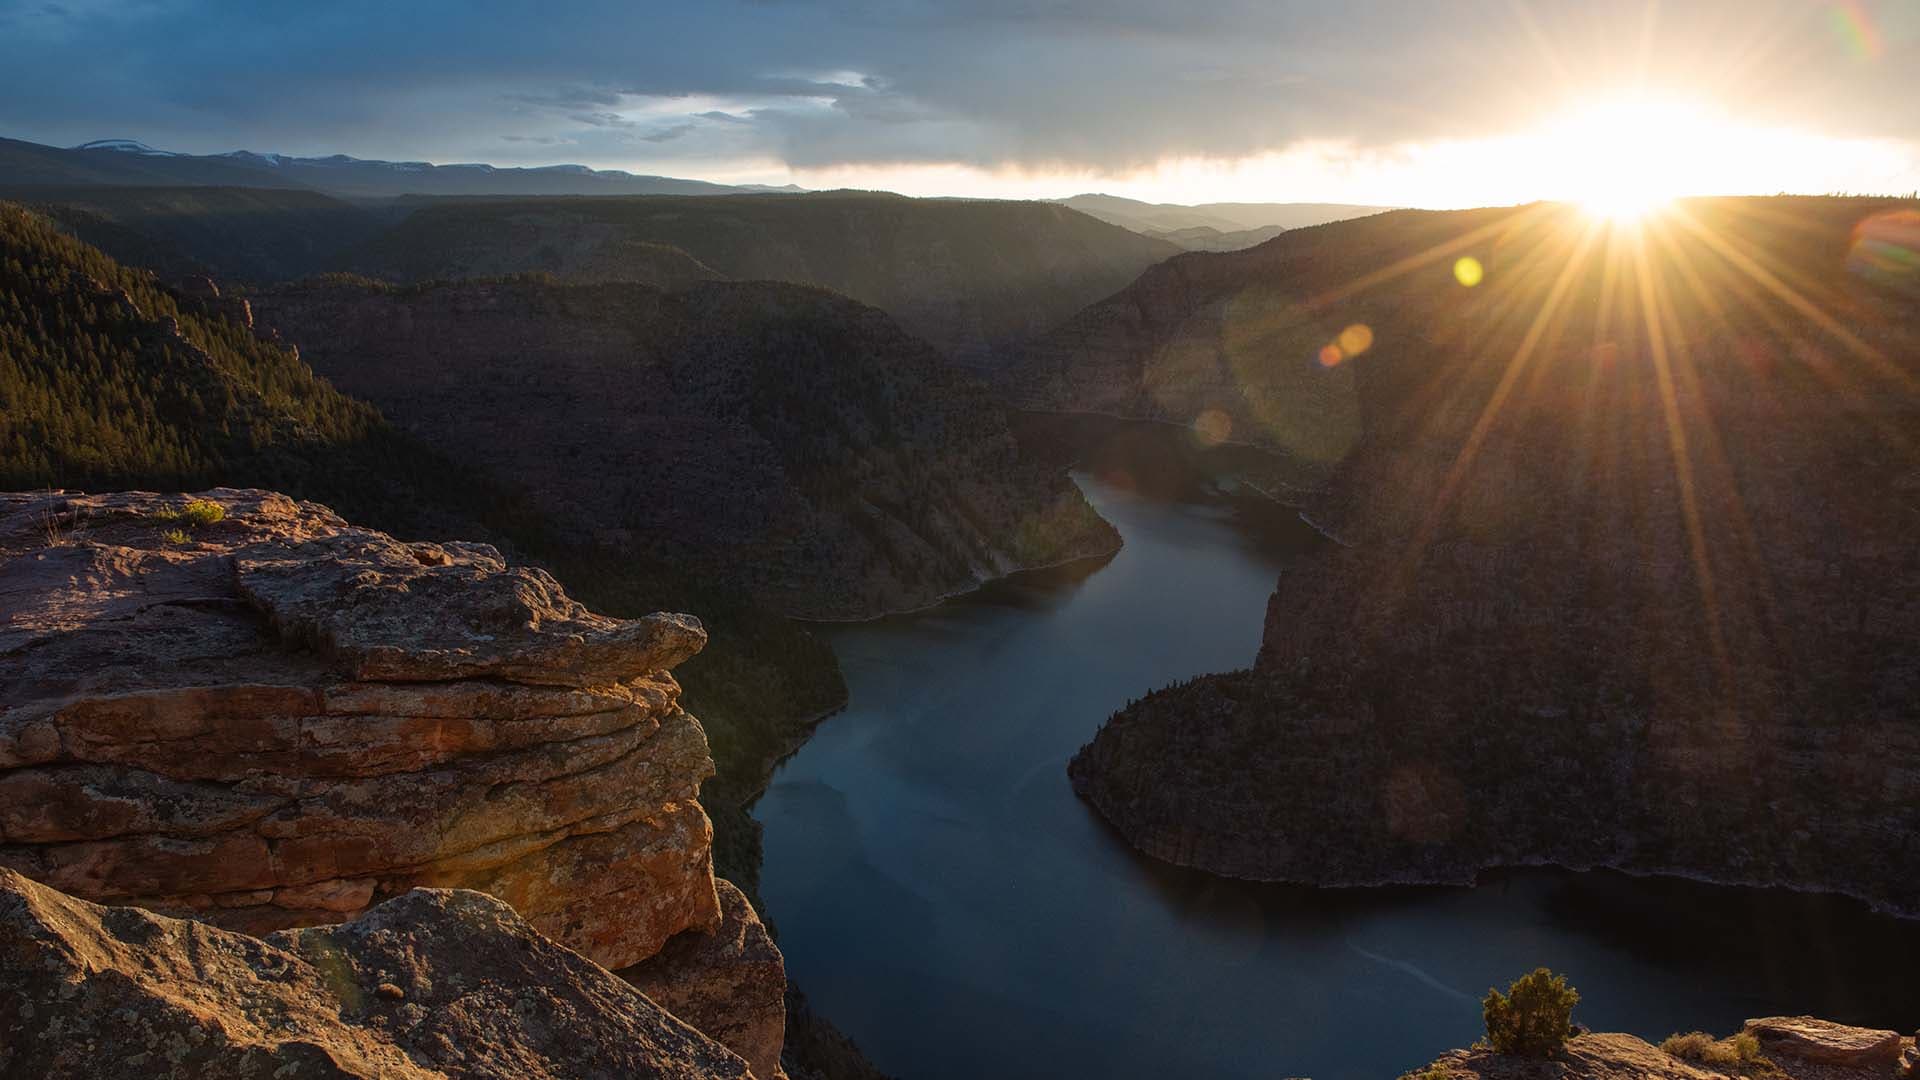 The sun sets on the Red Canyon Overlook, 518 metres above the Flaming Gorge Reservoir, near Dutch John, Utah.